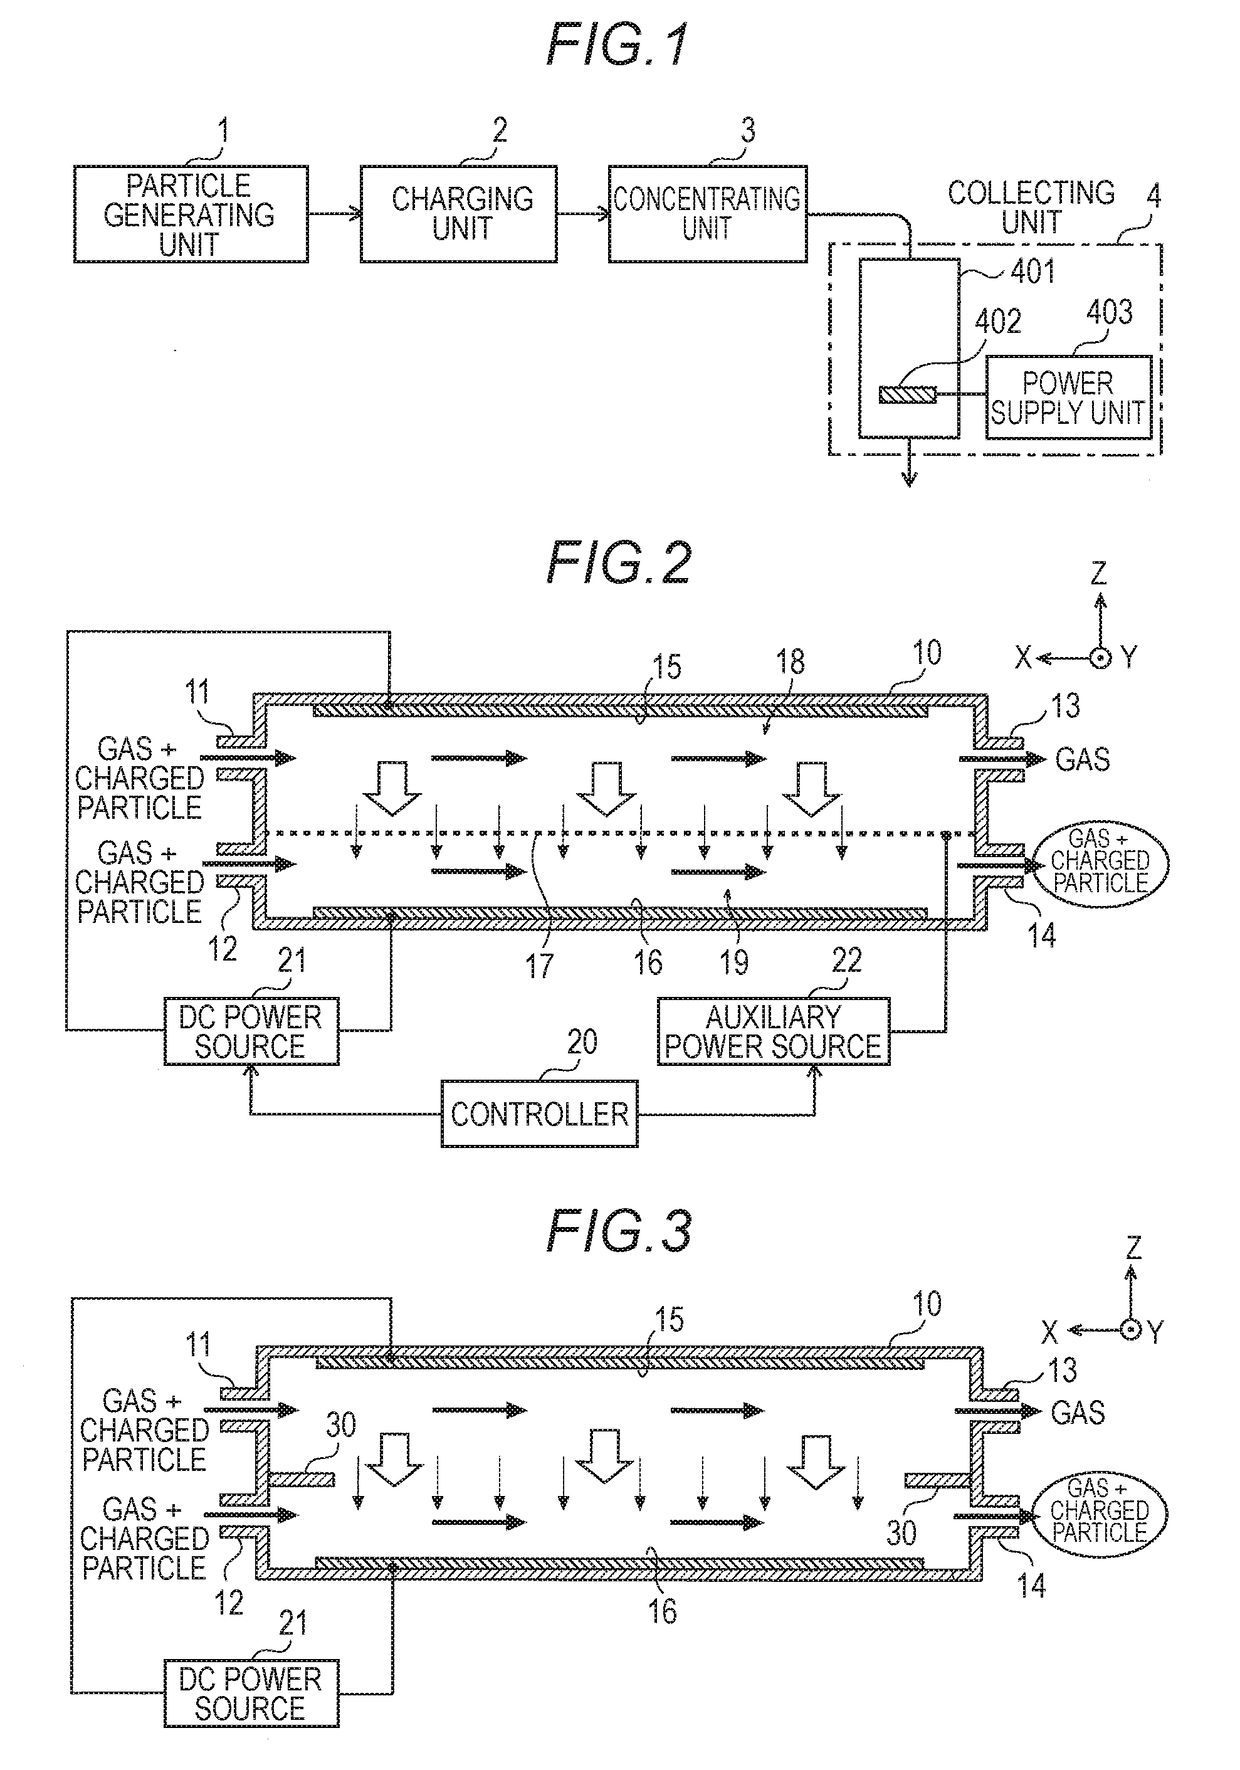 Particle collecting apparatus